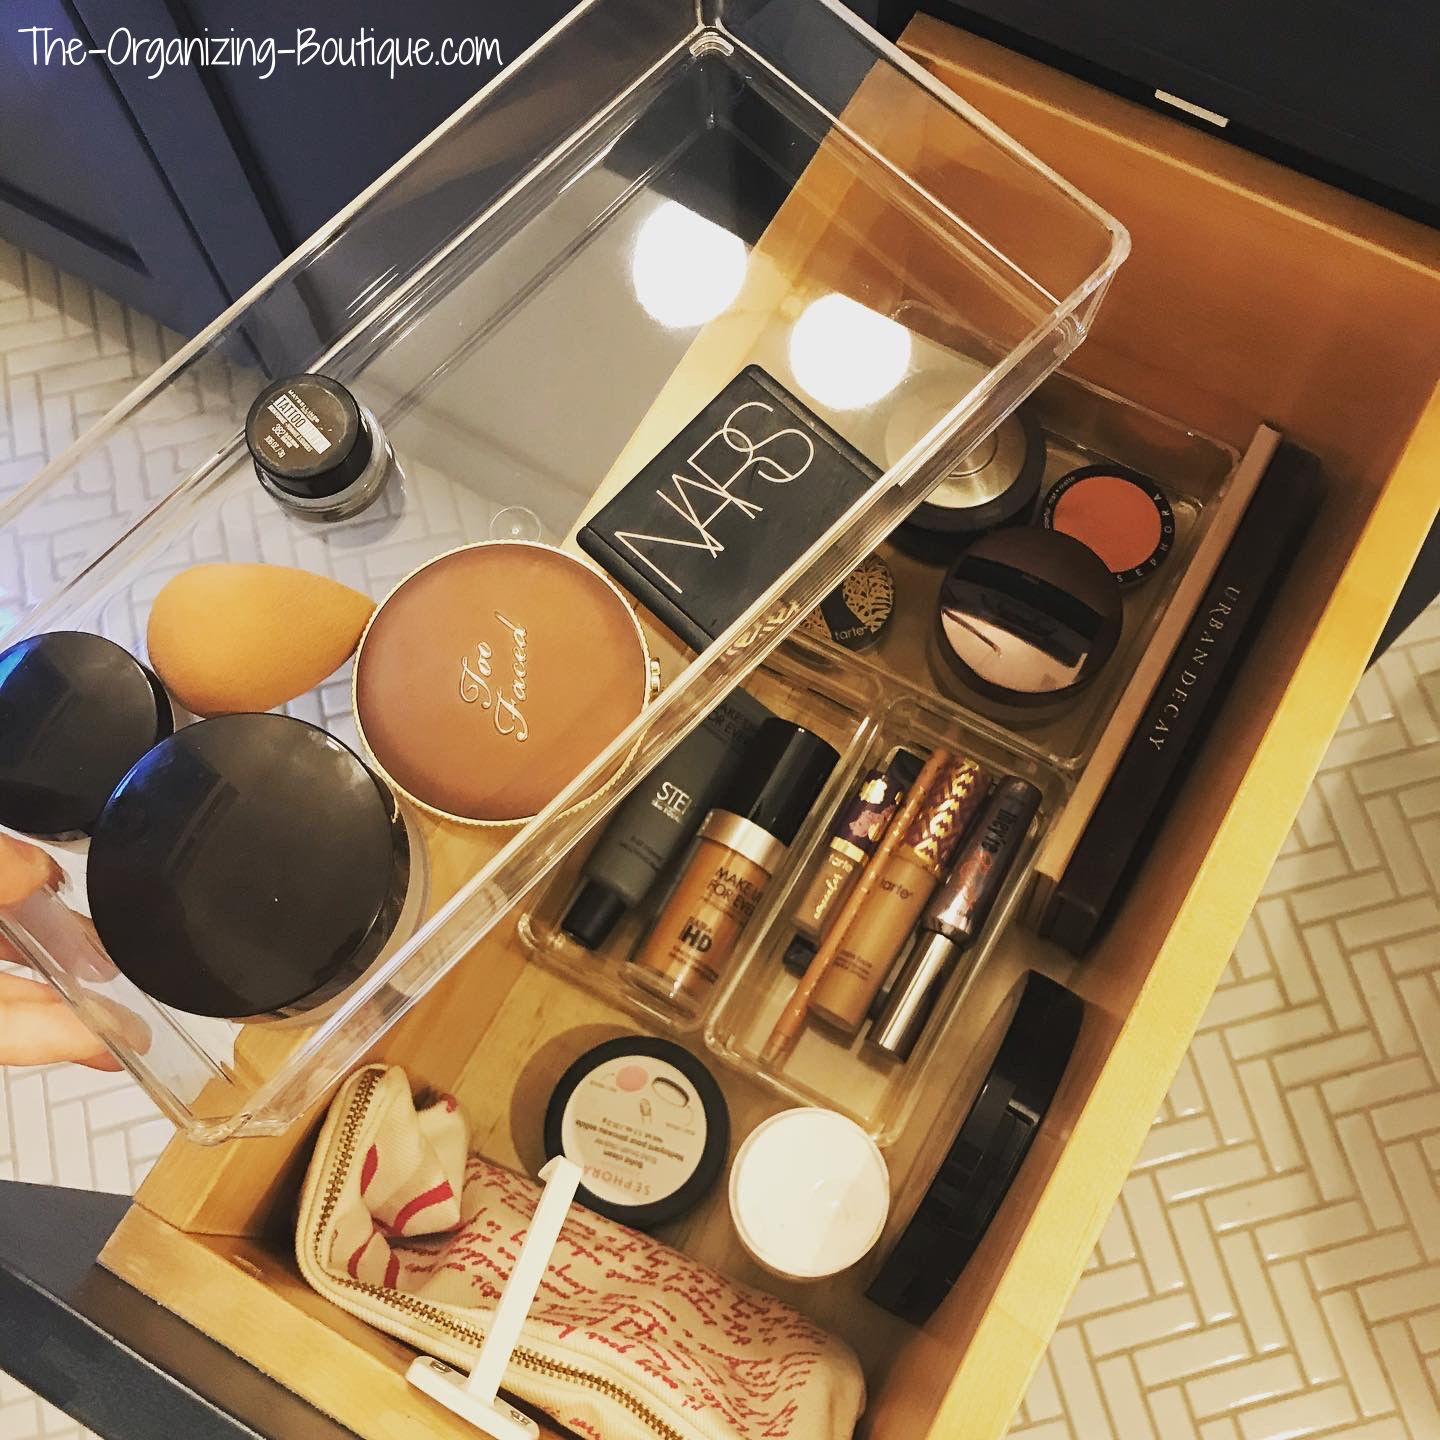 https://www.the-organizing-boutique.com/images/Bathroom-Makeup-Drawer-Trays-1.jpg